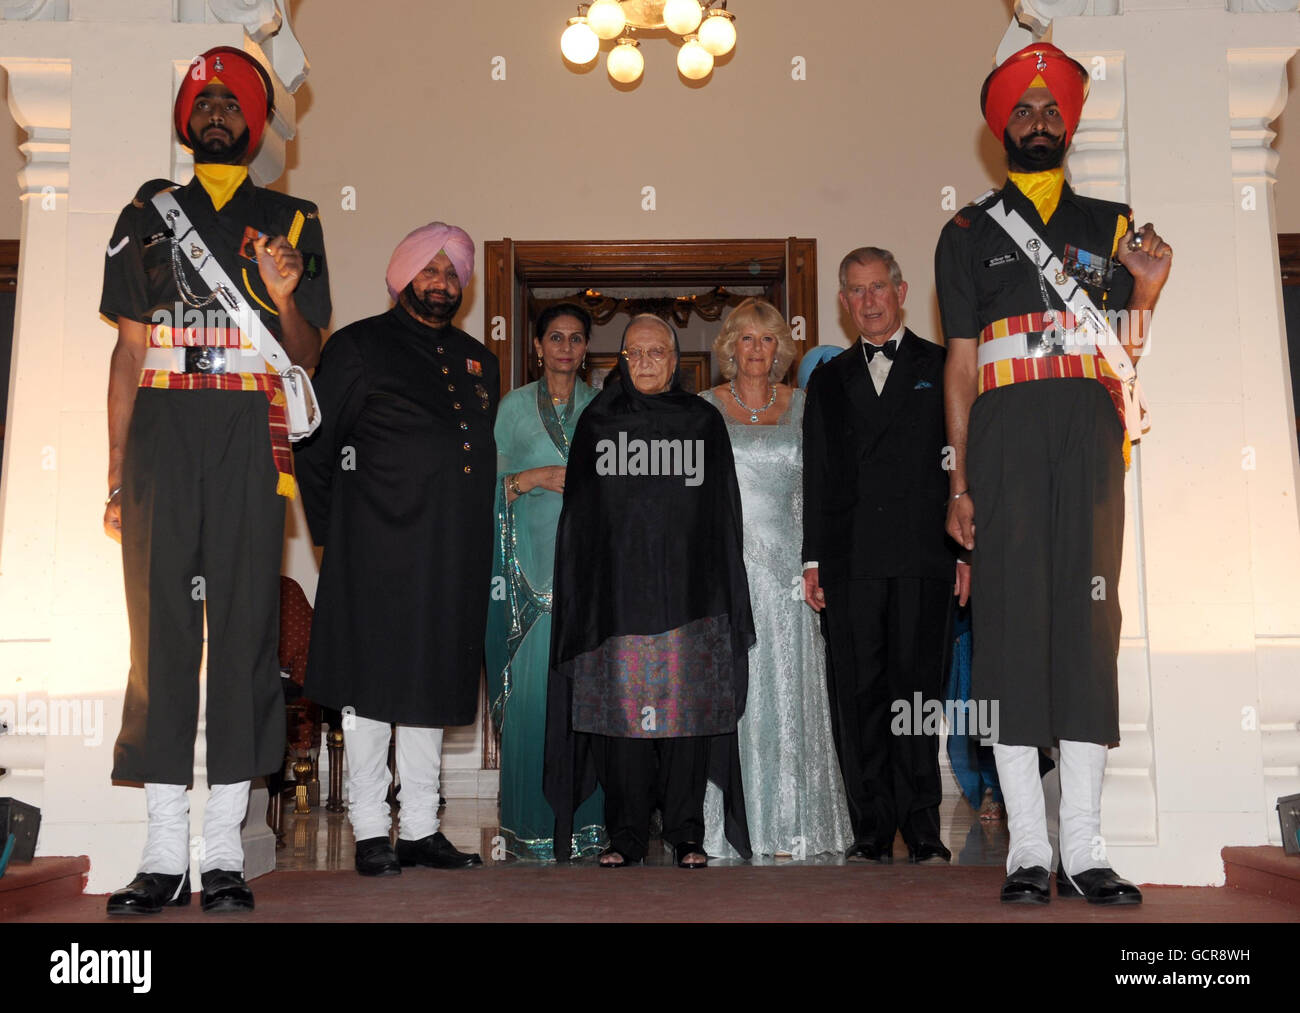 The Prince of Wales and Duchess of Cornwall arrive at the Maharaja's palace (left to to right) Maharaja of Patiala Captain Amarinder Singh, Maharani of Patiala Preneet Kaur, the Maharaja's mother, (name not given), the Duchess of Cornwall and the Prince of Wales) in Patialia, India. Stock Photo